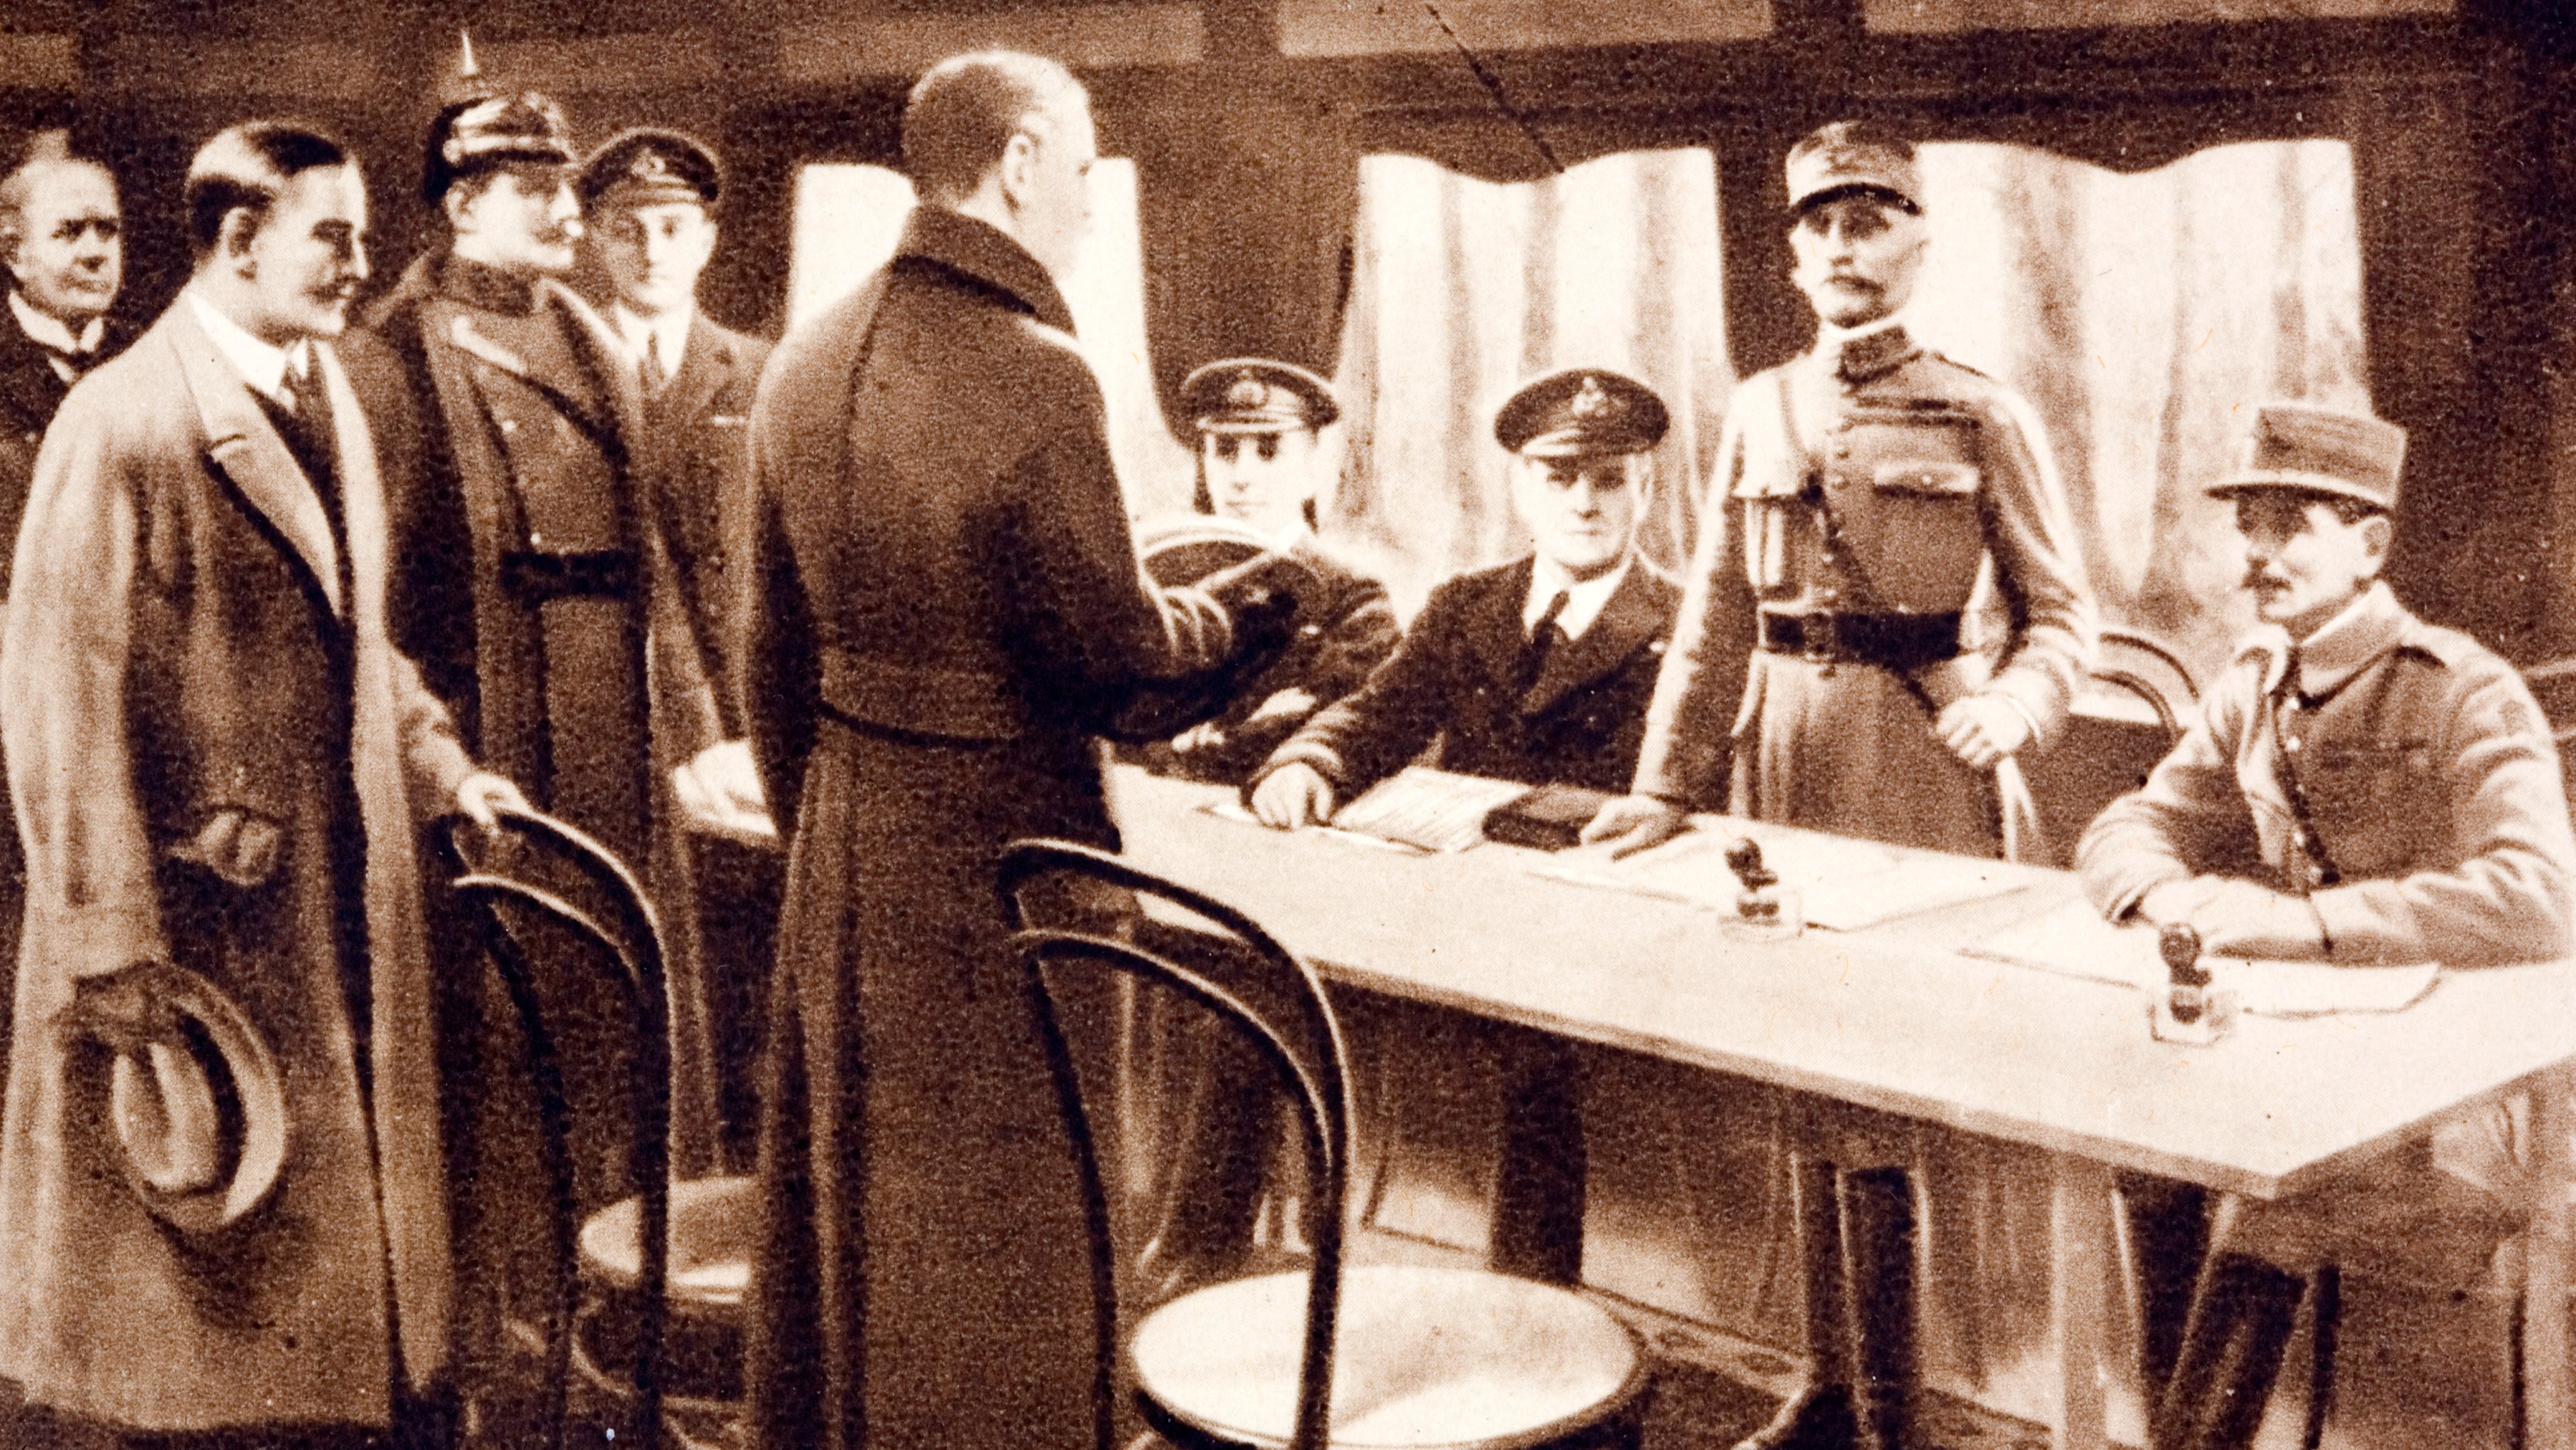 Signing the Armistice that ended the First World War